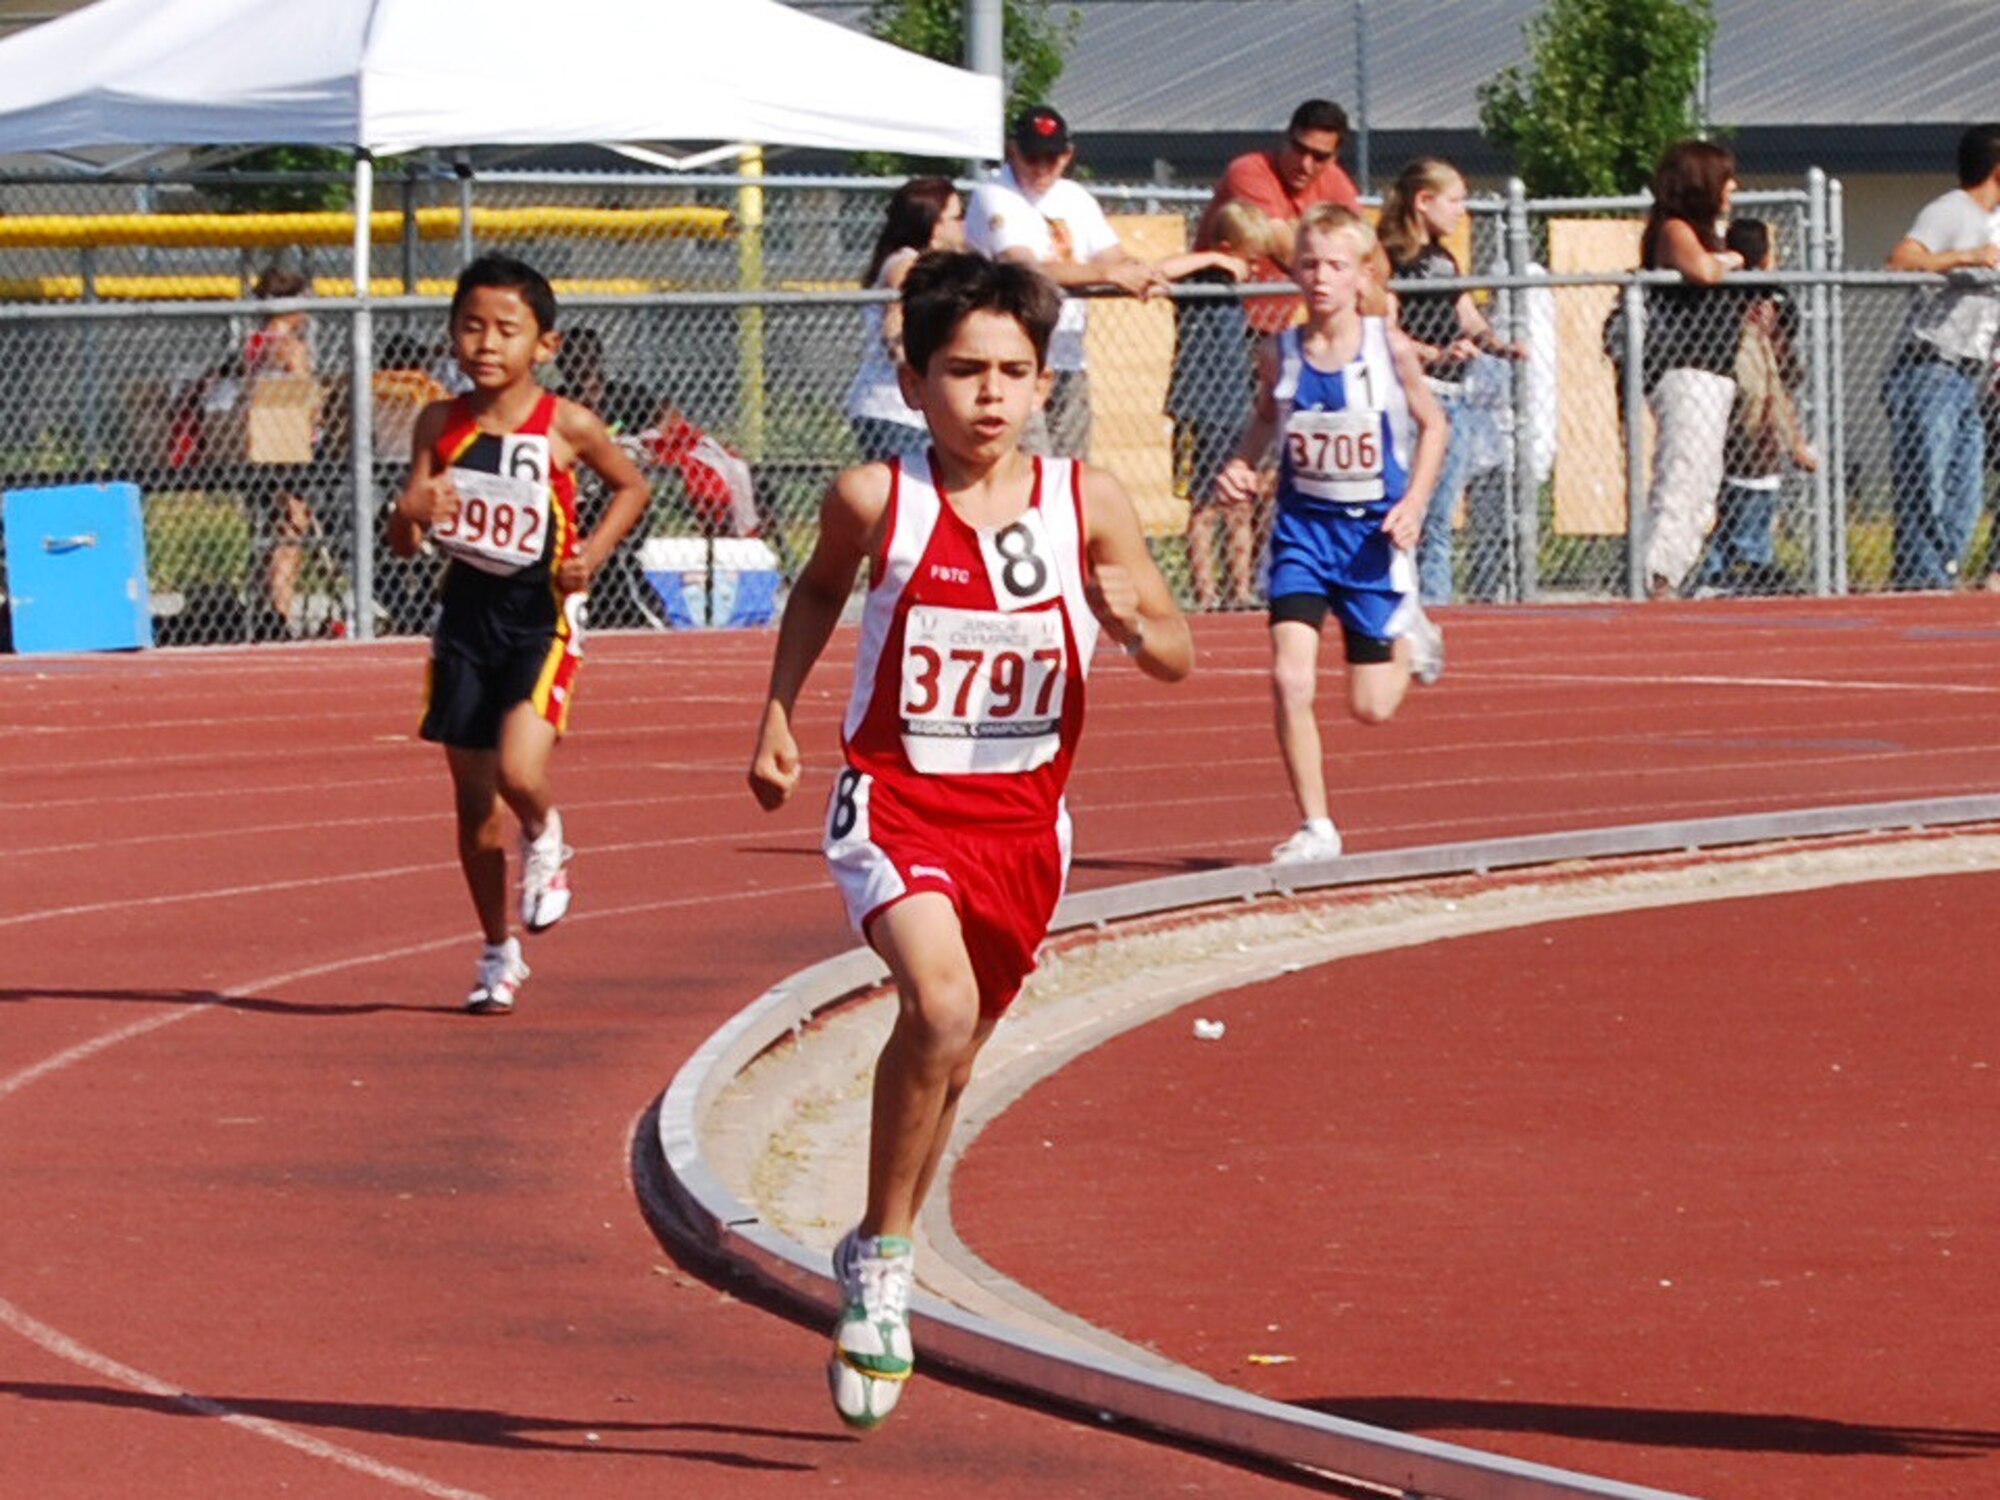 Brendan Myrick, center, competes in a recent track race. Myrick is one of seven children with ties to Travis who will compete in the Amateur Athletic Union Junior Olympics scheduled for July 23 through Aug. 2 in Detroit. (Courtesy photo)